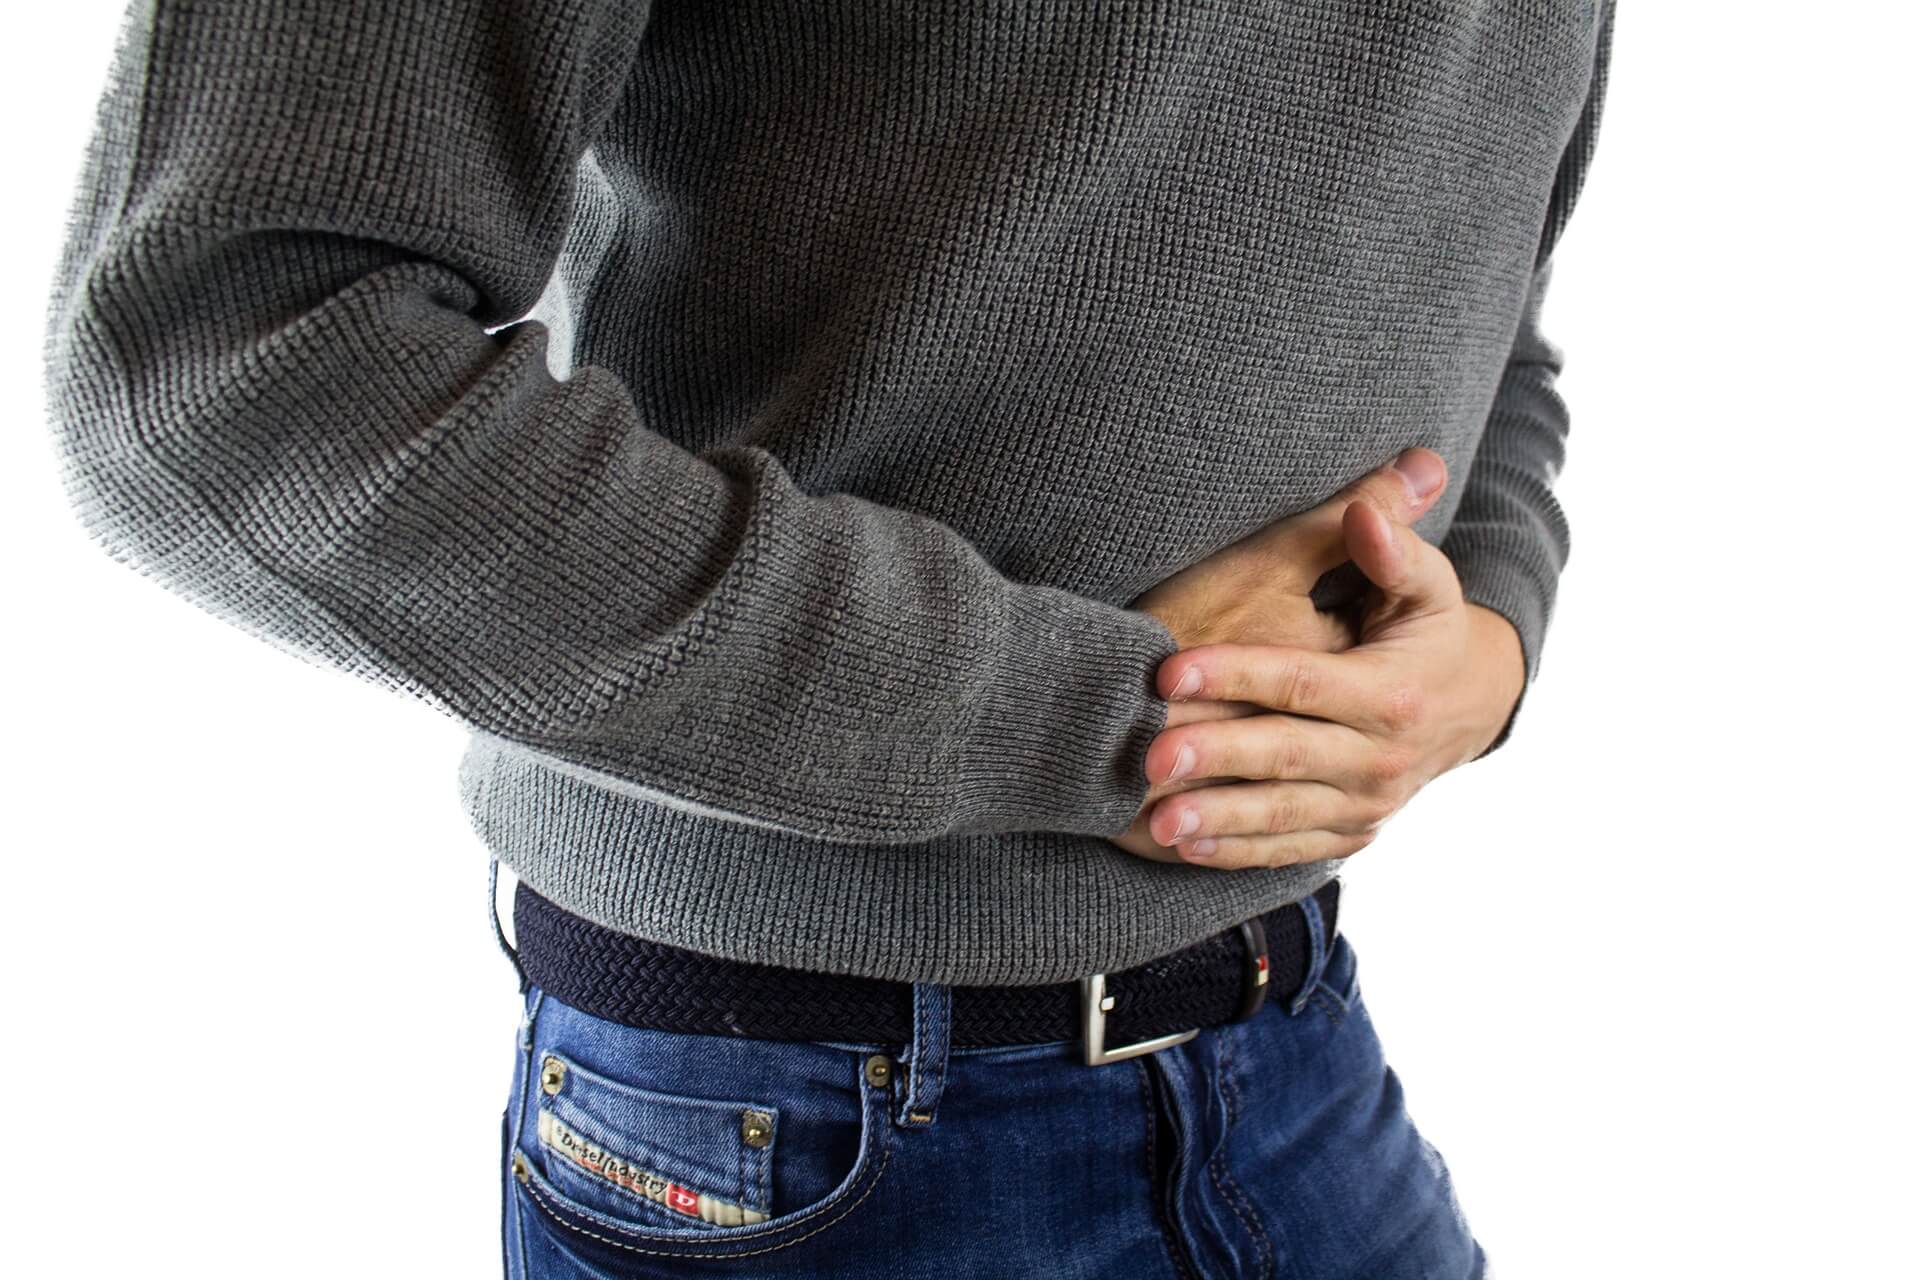 lactose intolerance can cause abdominal pain